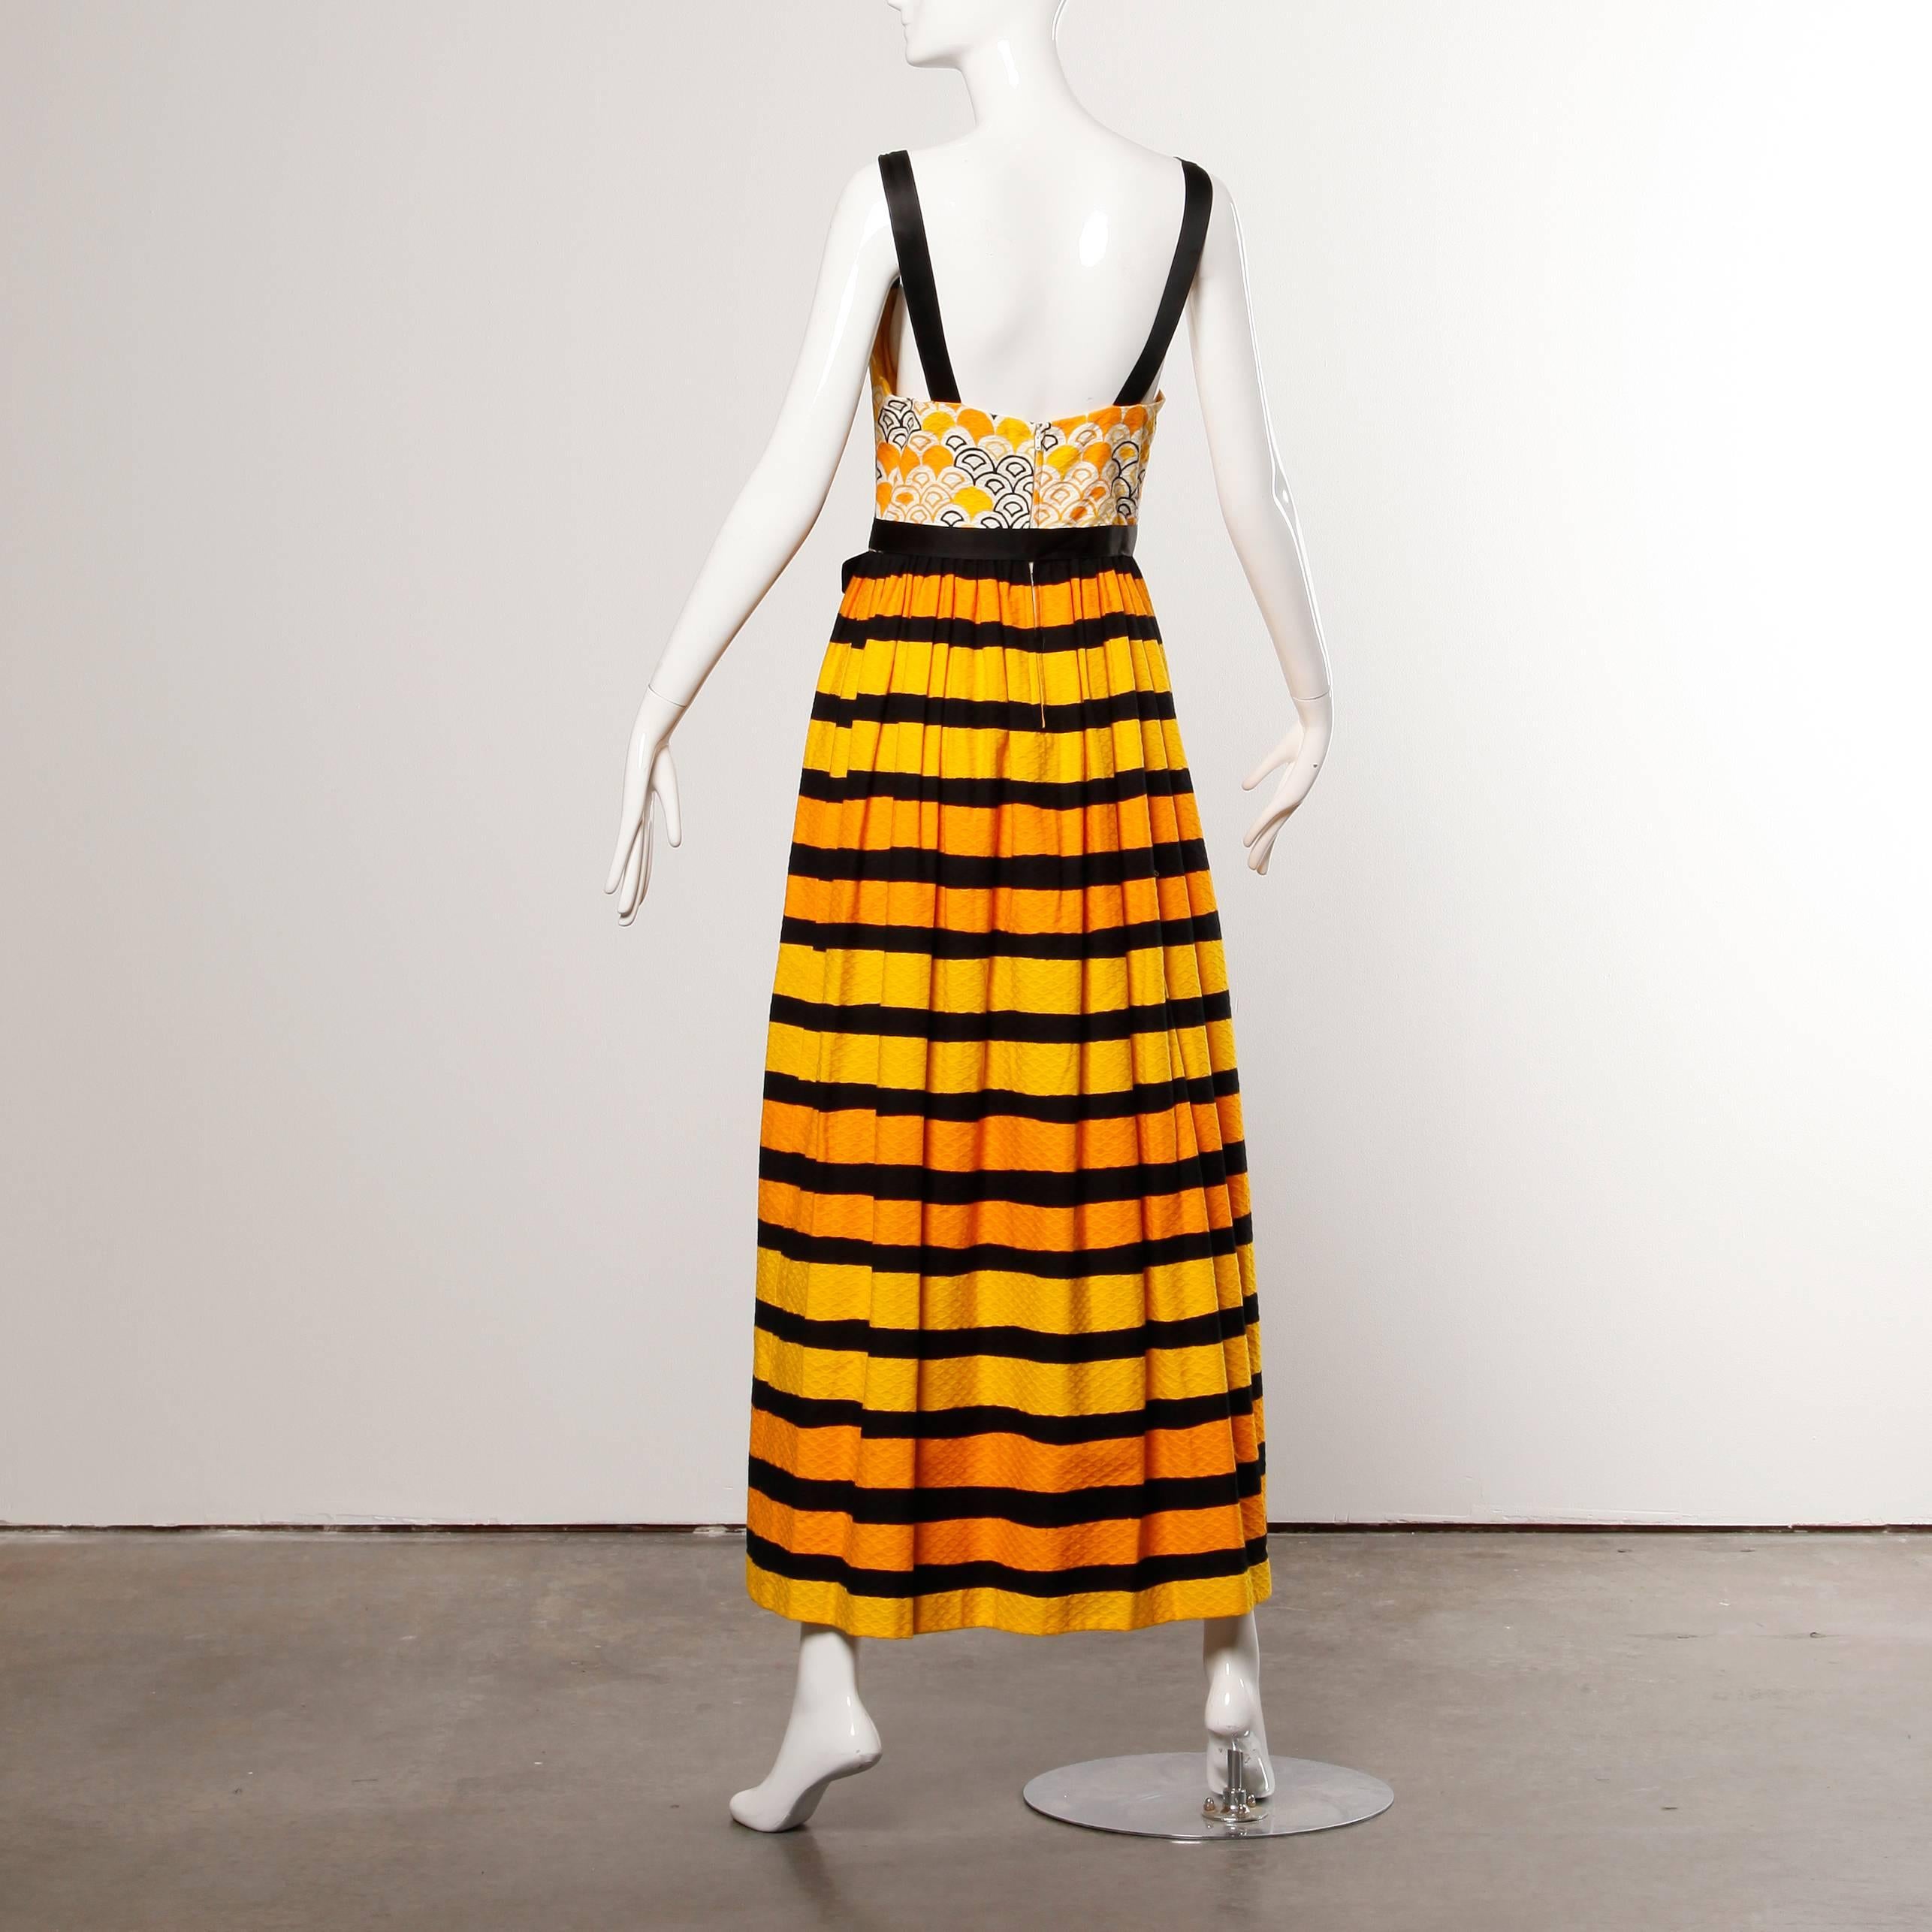 Gorgeous vintage maxi dress with a geometric scalloped print and horizontal stripes by Larry Aldrich. Sleeveless sleeves and bow detail.

Details: 

Lined
Side Pockets
Back Zip and Hook Closure
Marked Size: 12
Estimated Size: S-M
Color: